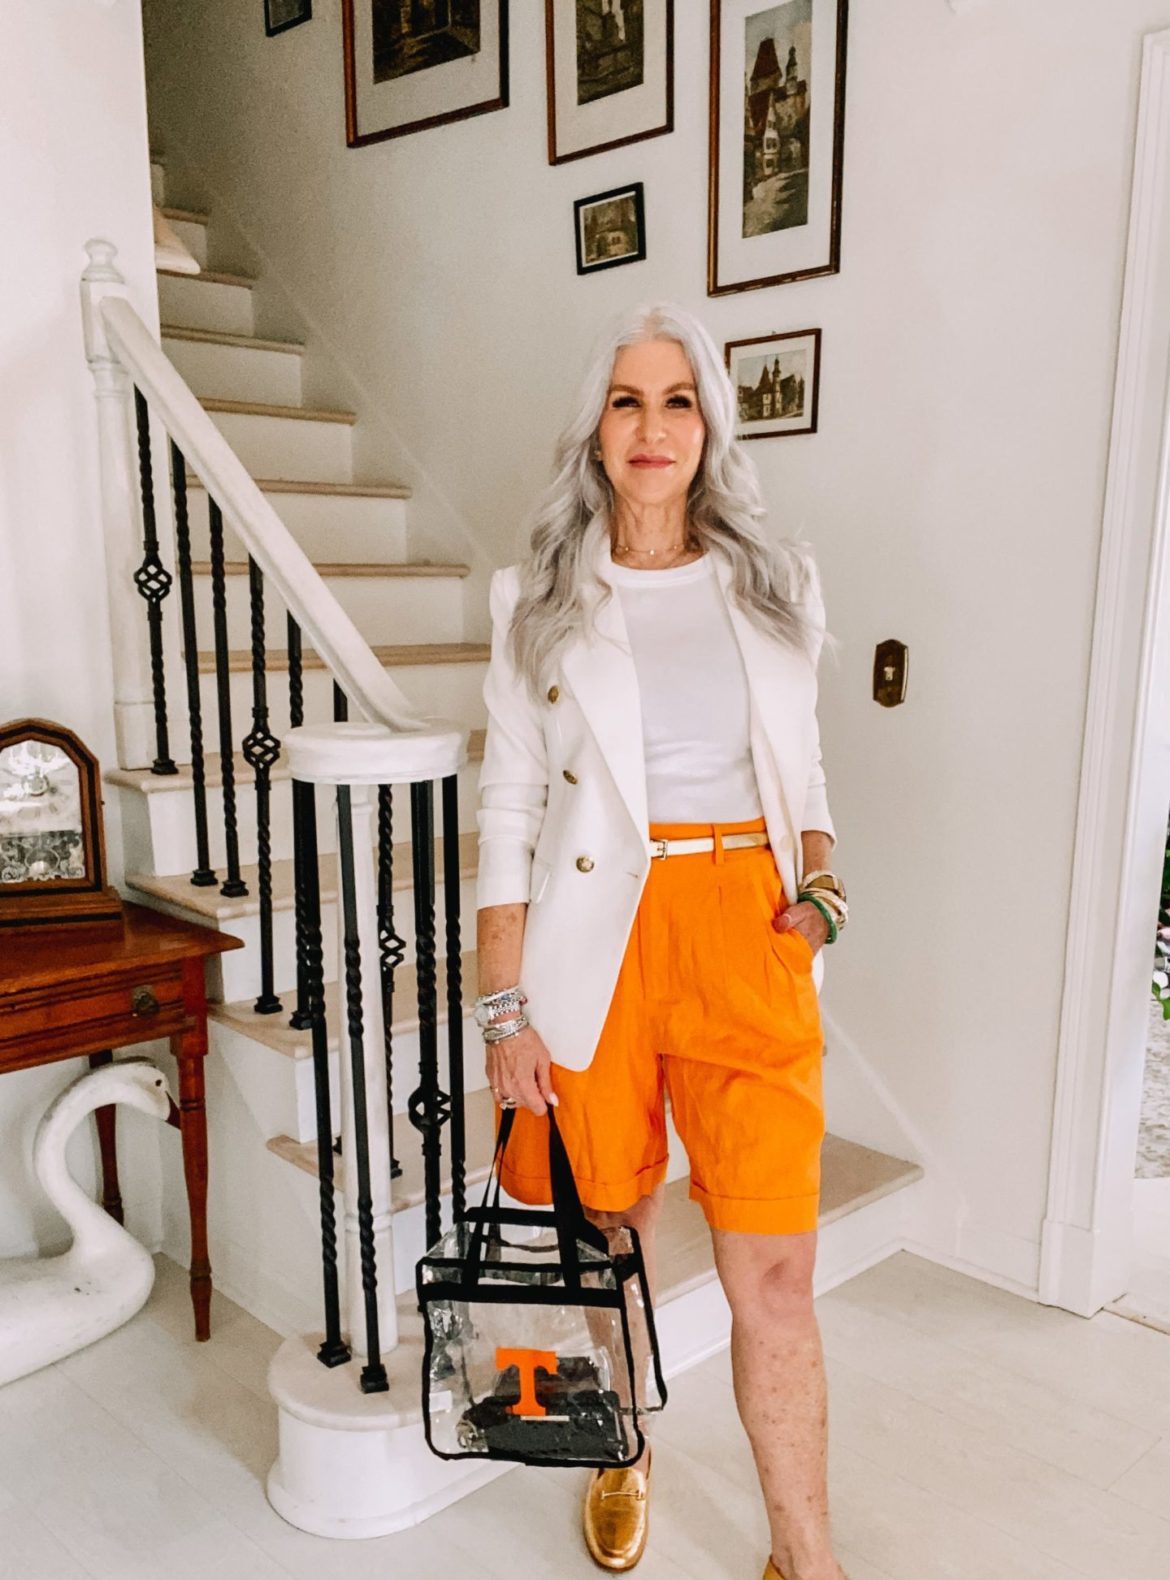 silver hair woman wearing orange shorts and white top and jakcket